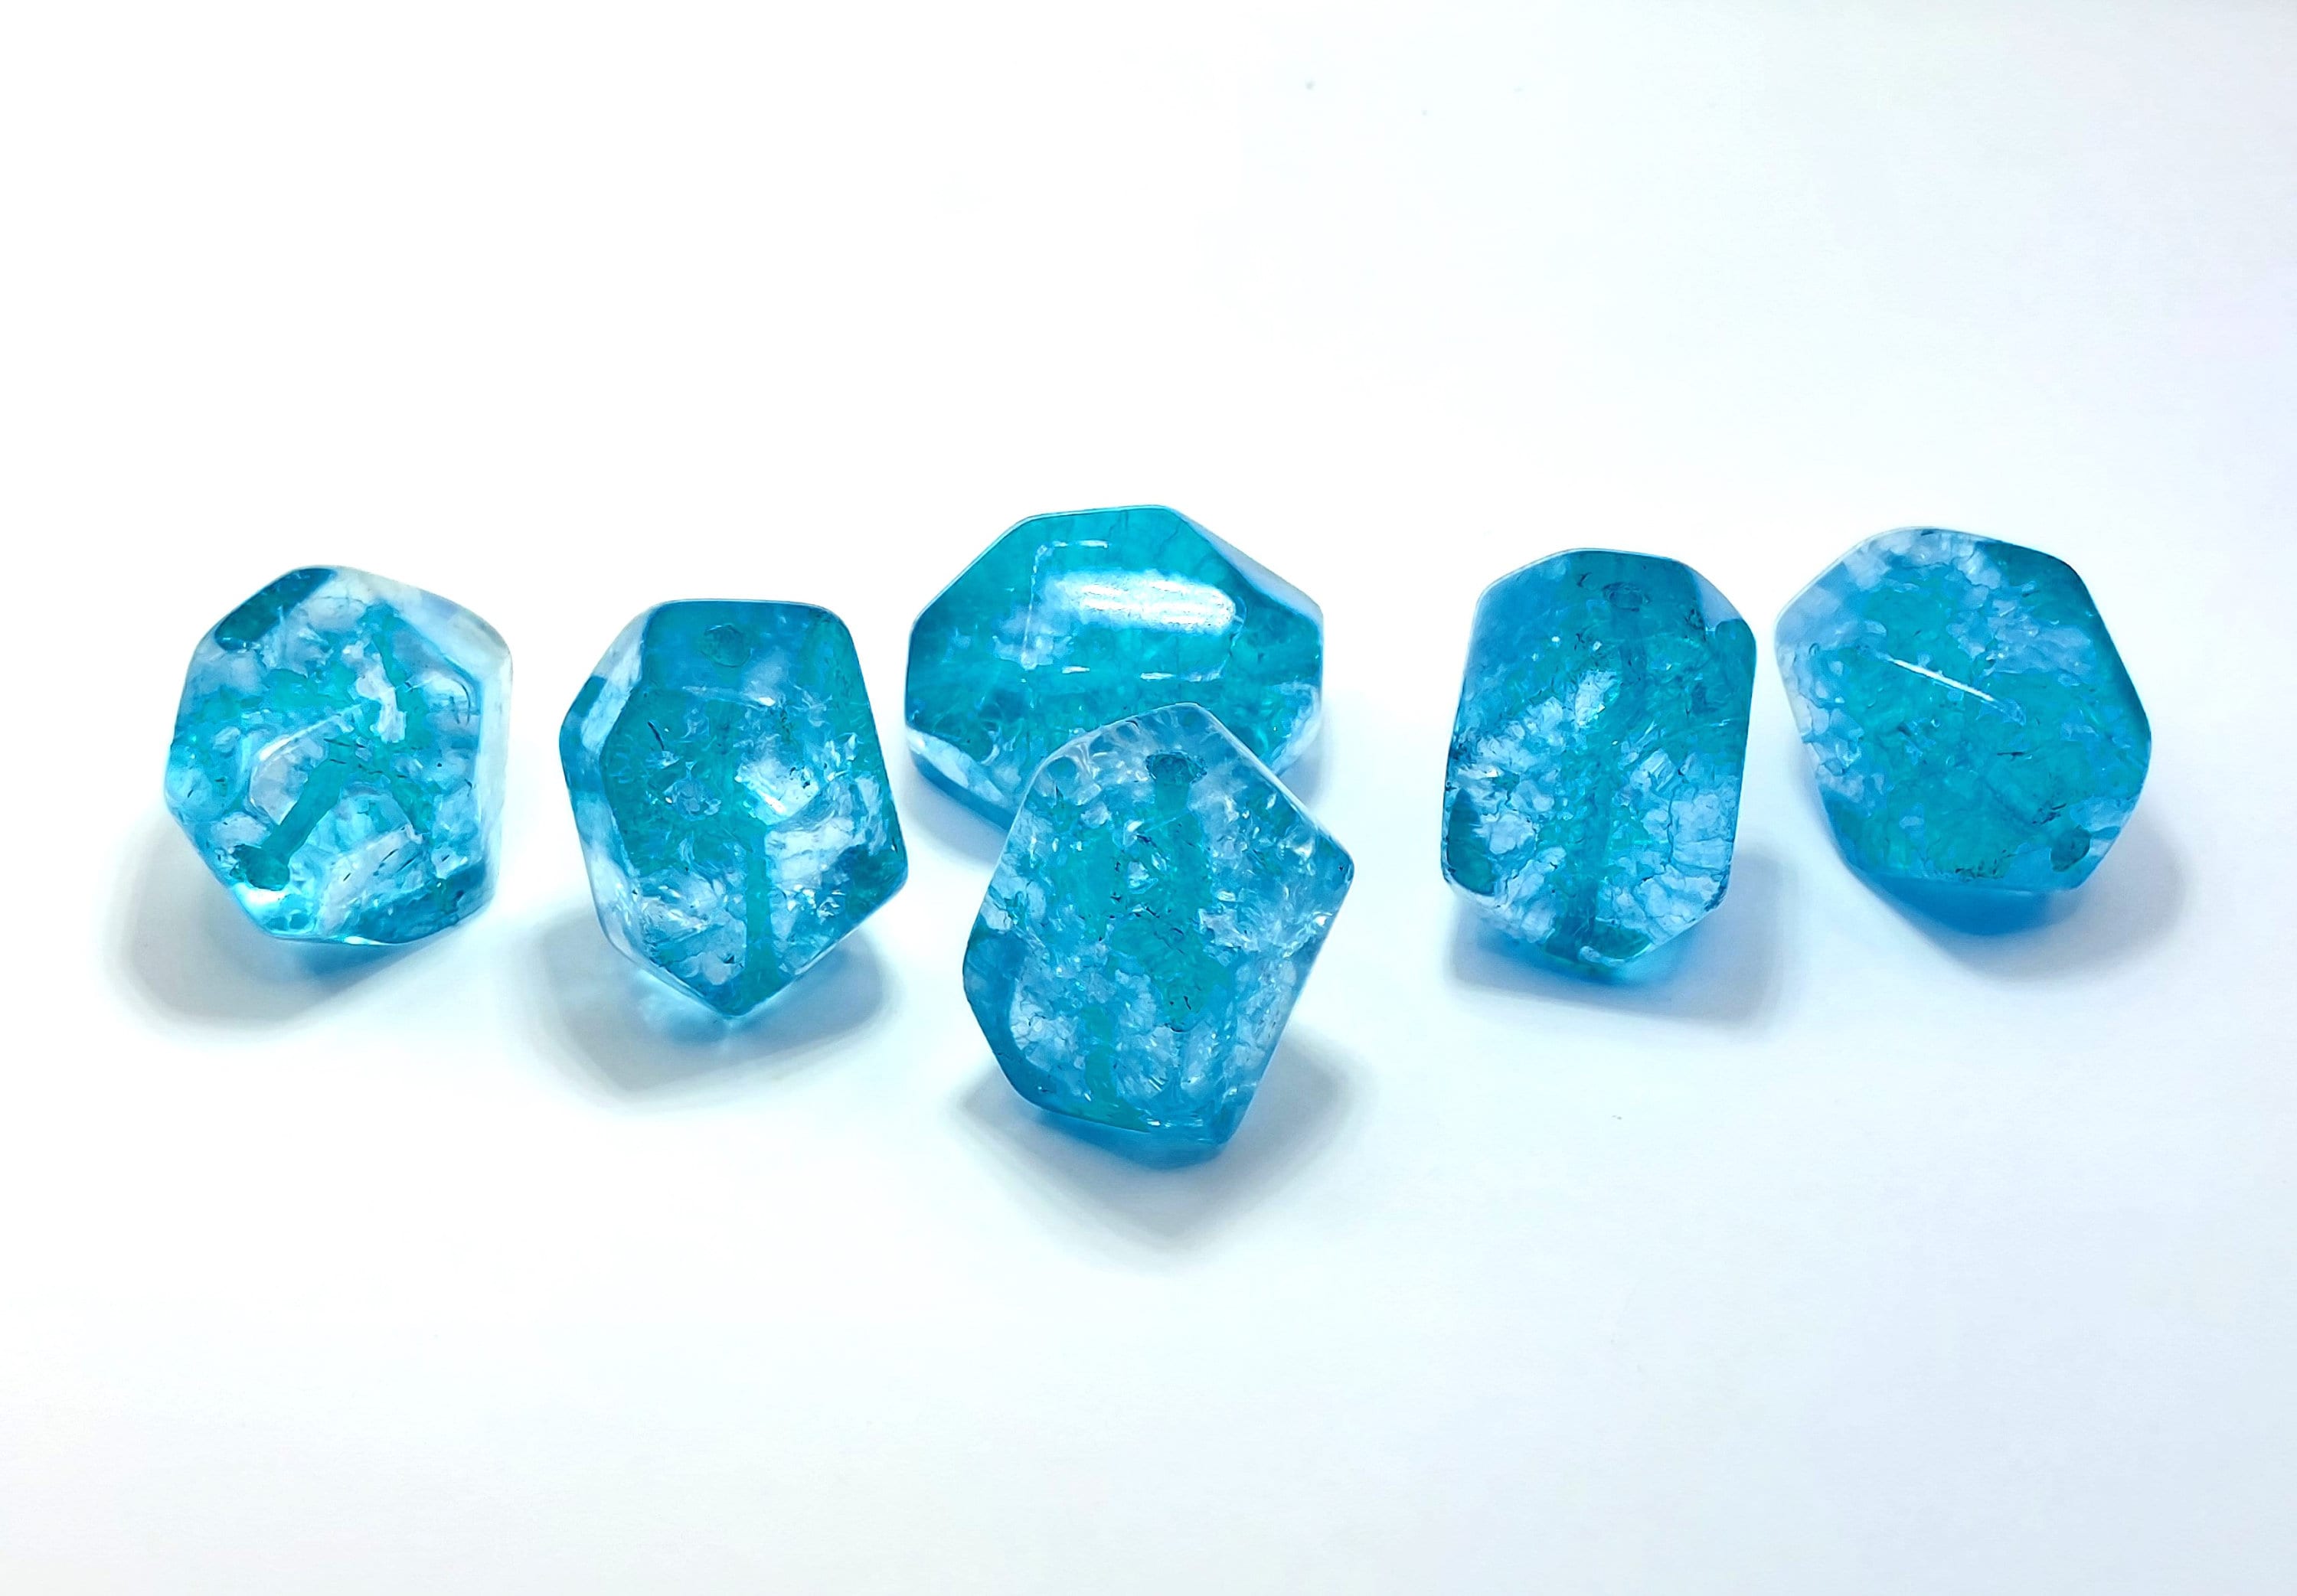 Large Hole Glass Beads, 8mm X 12mm Rondelle Roller With 5mm Hole, Aqua Blue  With Gold Lining, 5 Pieces 